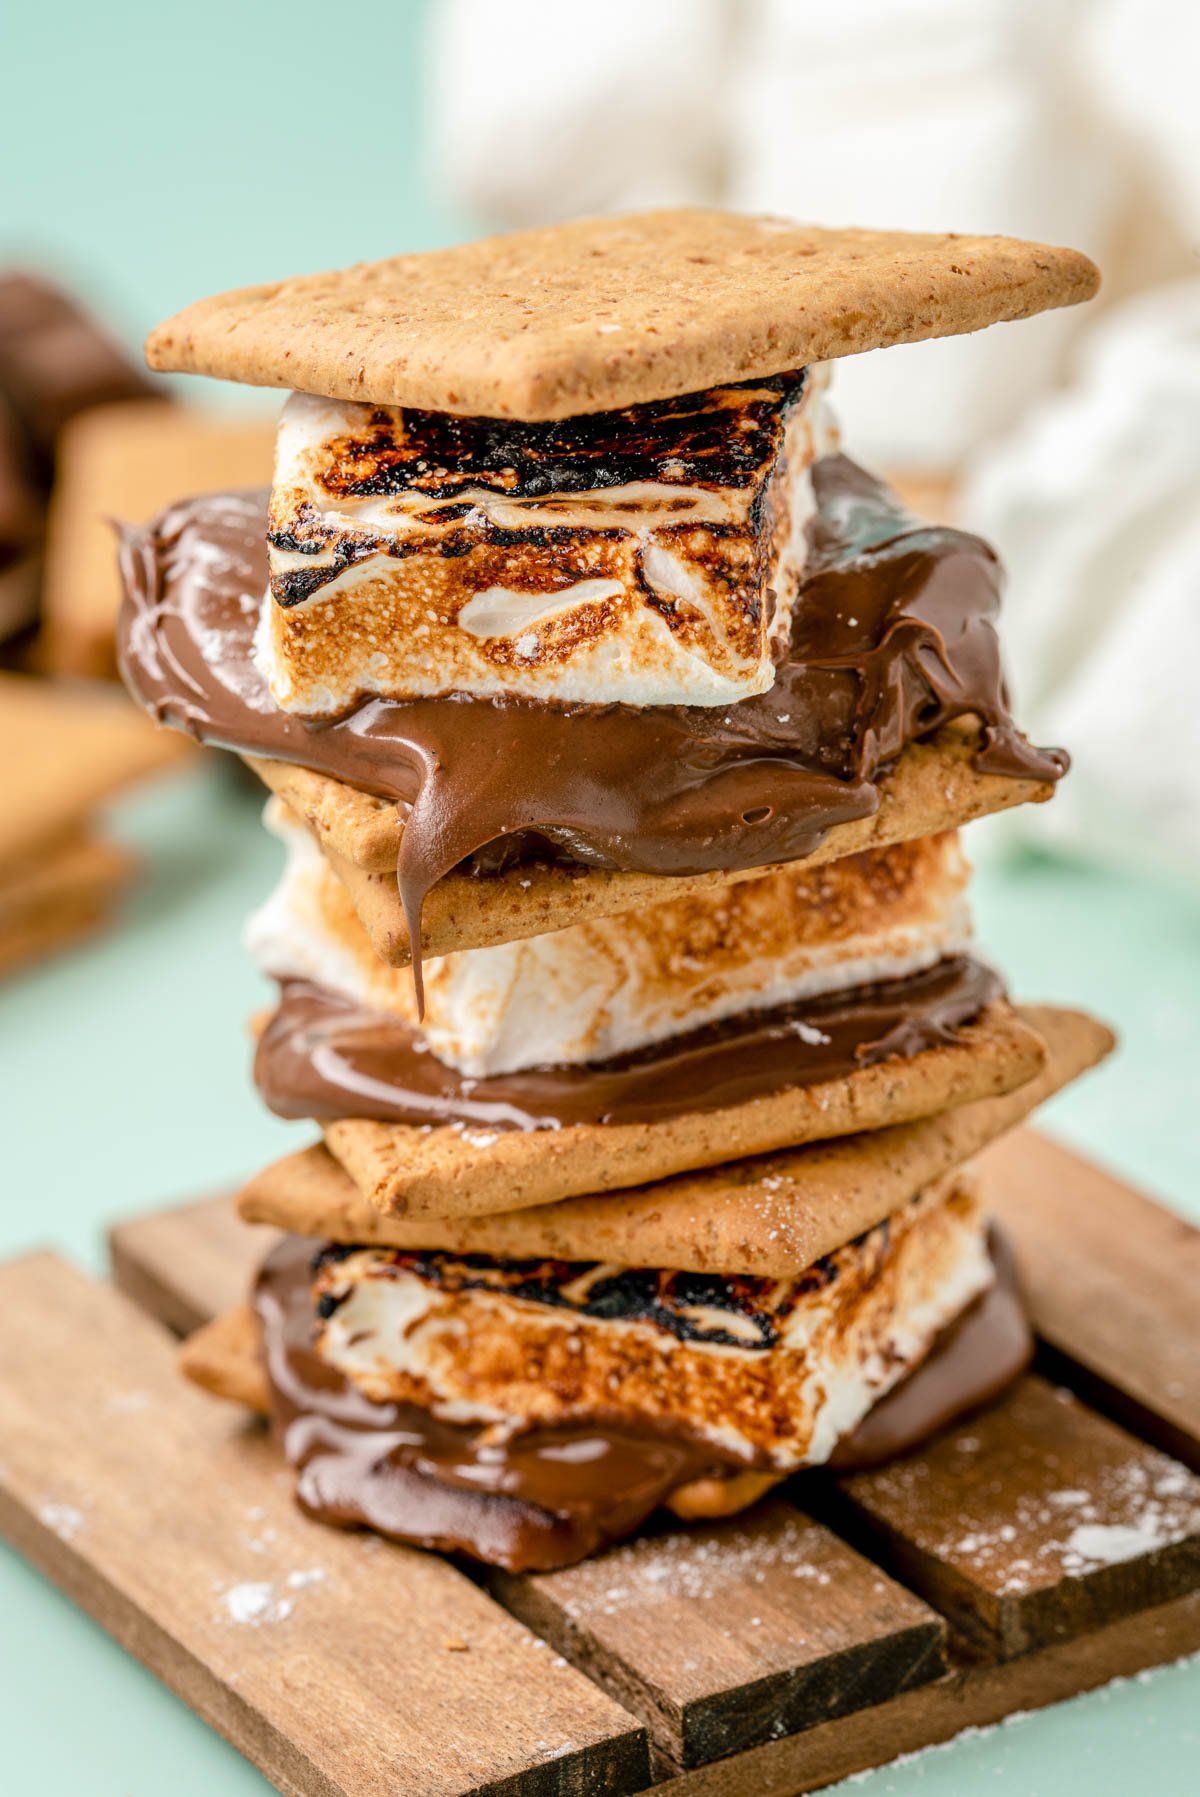 S'mores made with homemade marshmallows stacked on a wooden coaster.